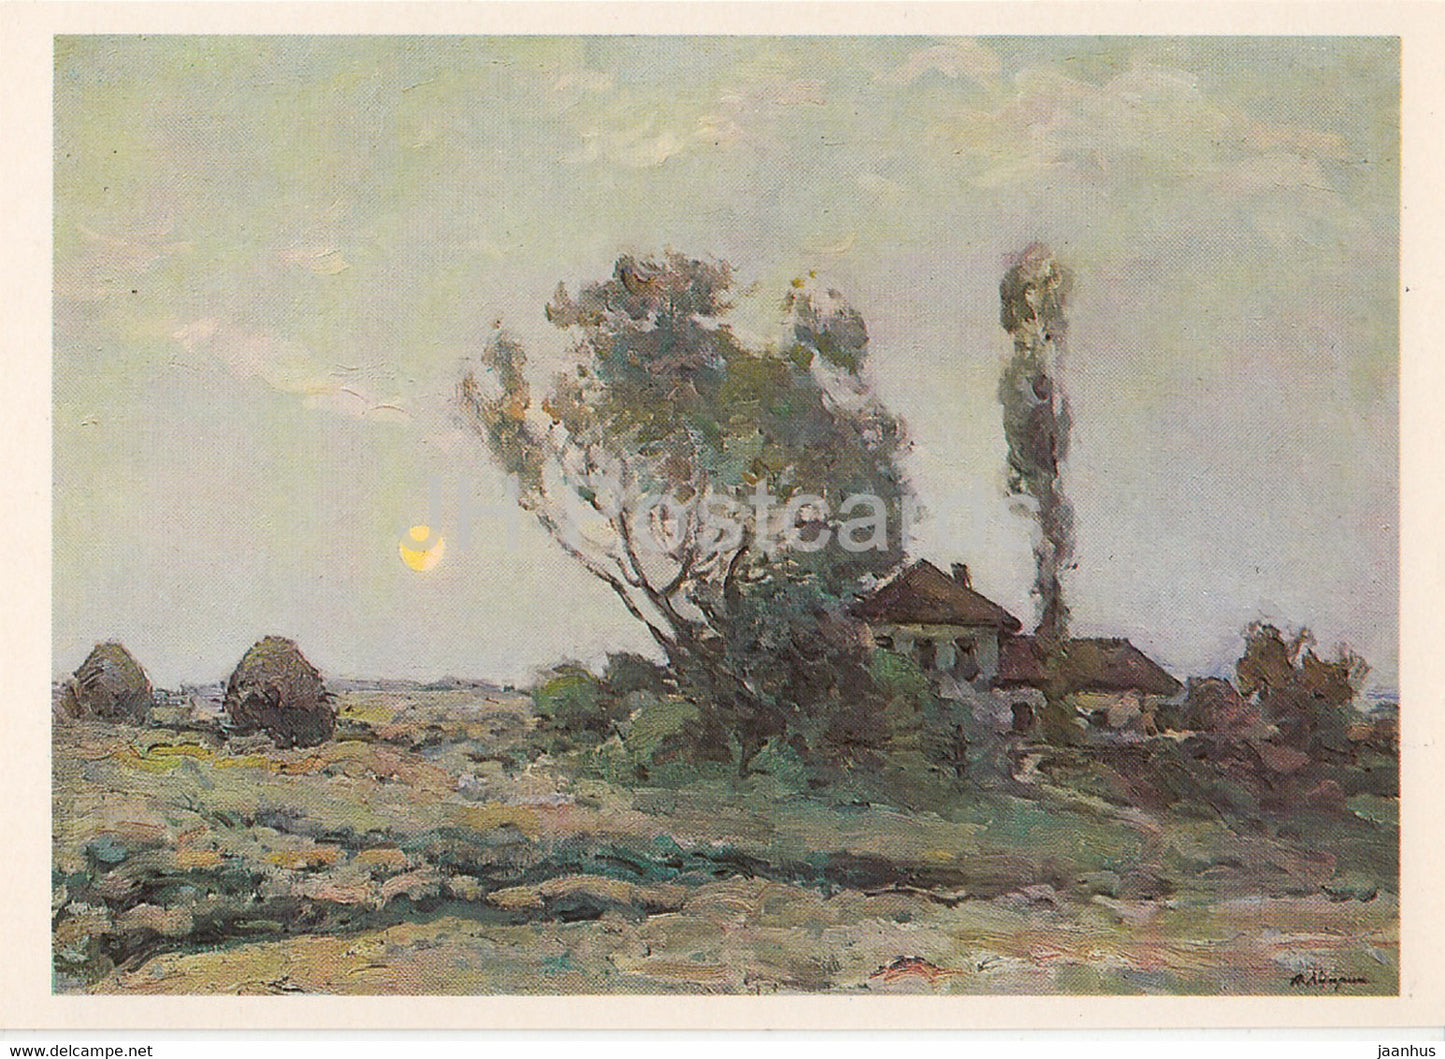 painting by A. Kuprin - Landscape with Moon - Russian art - 1982 - Russia USSR - unused - JH Postcards